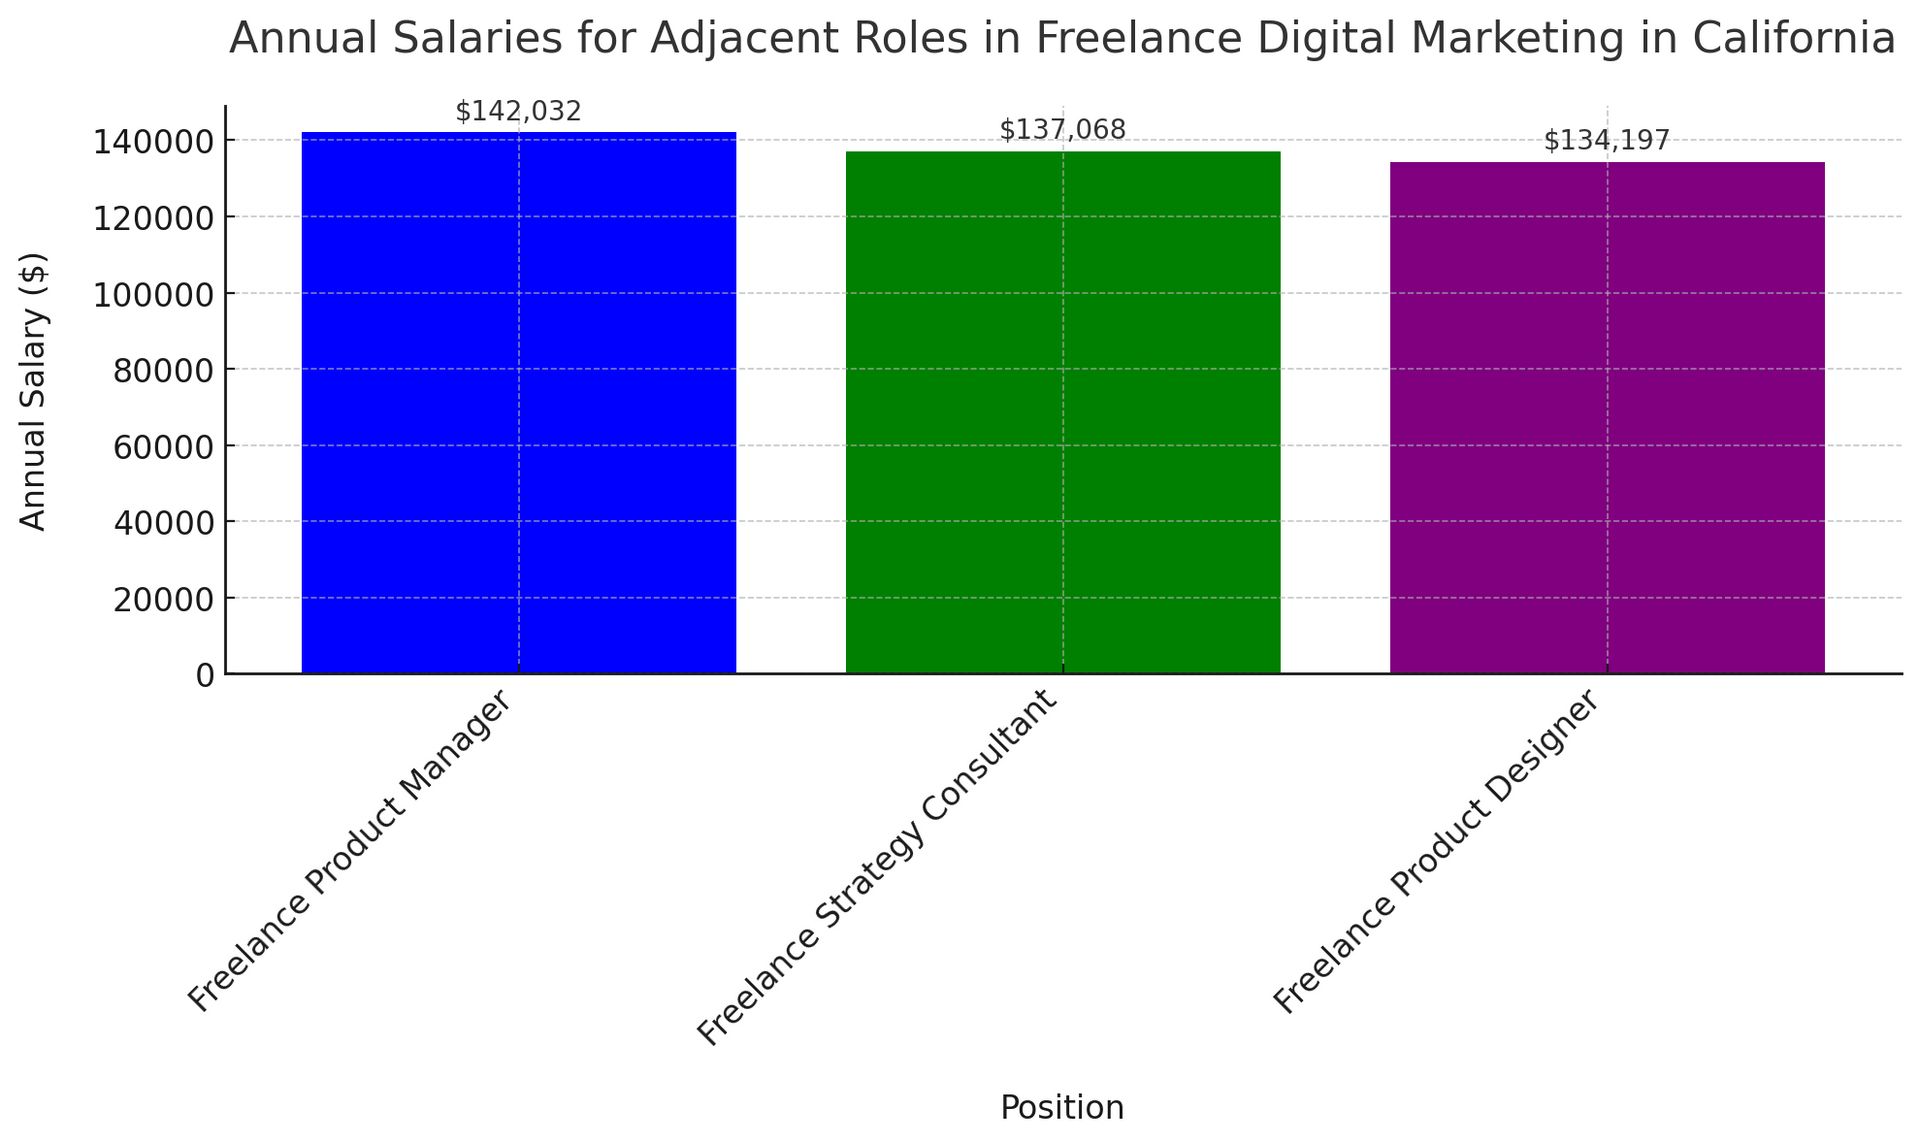 A graph showing annual salaries for adjacent roles in freelance digital marketing in california